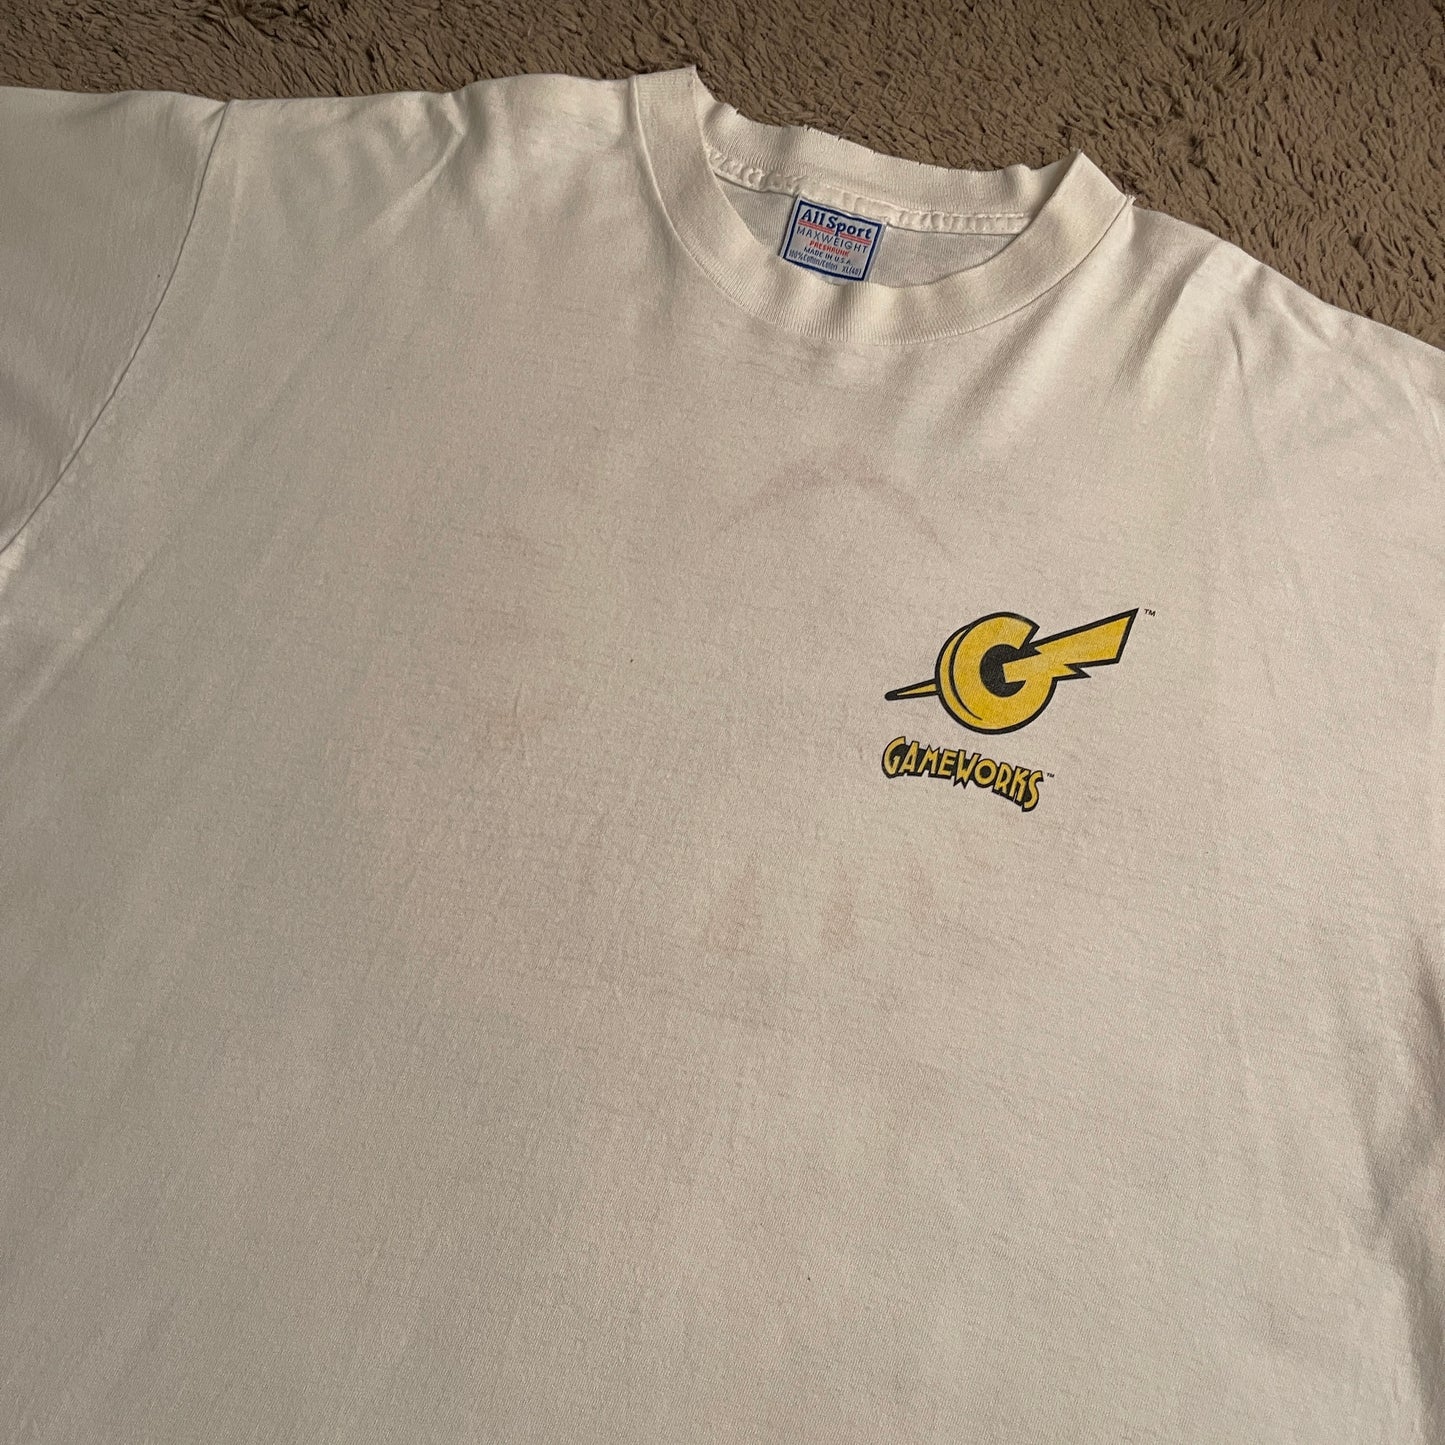 Gameworks "Hour of Power" Tee (XL)